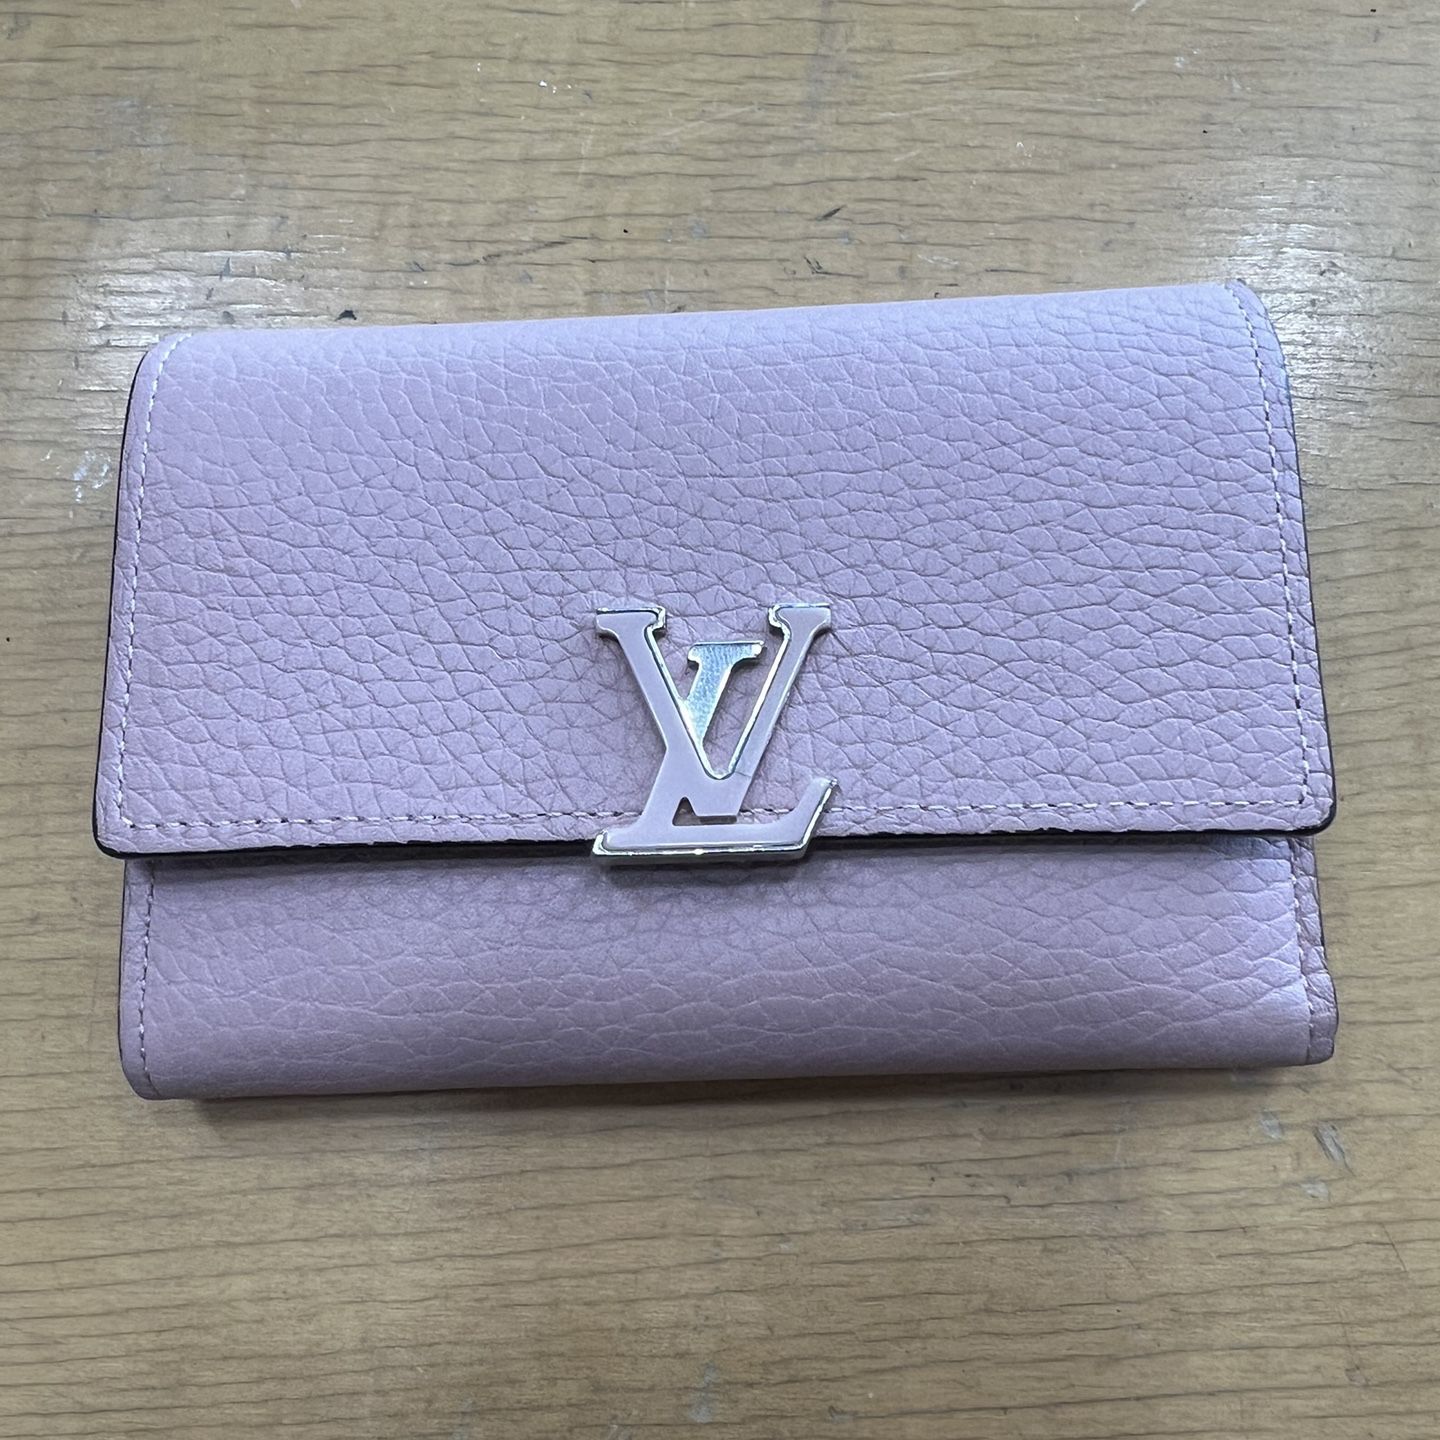 LV Capucines XS Wallet for Sale in Orlando, FL - OfferUp